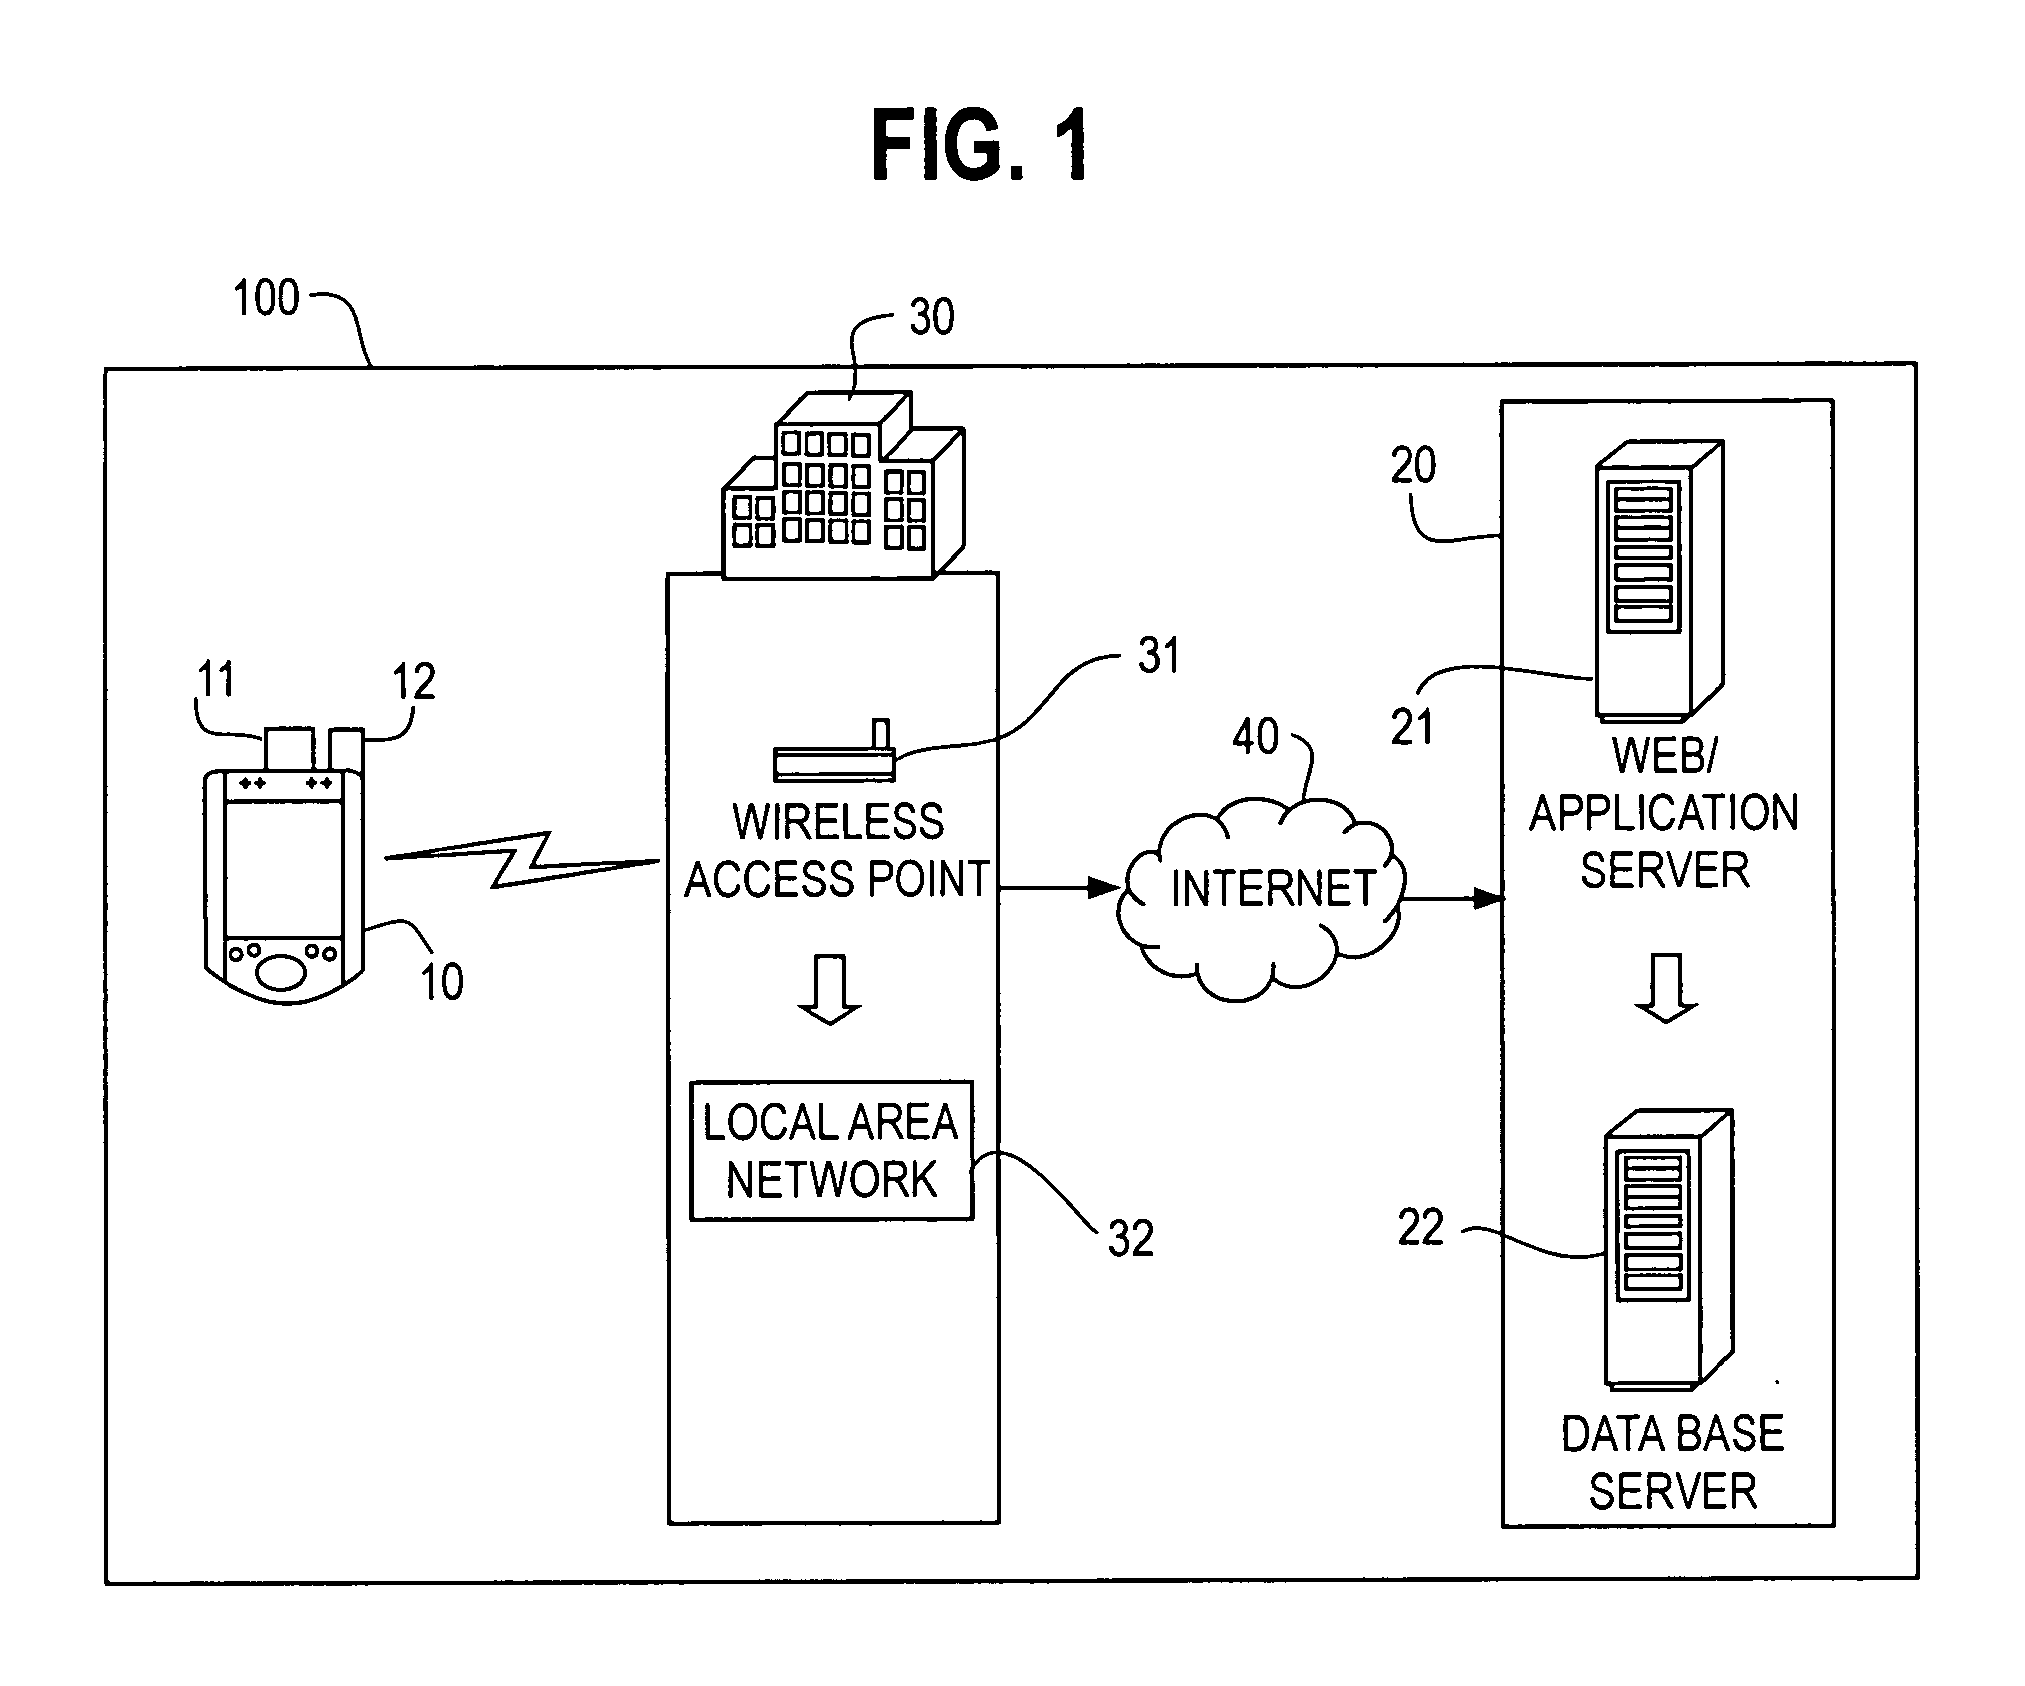 Method and system for facility management